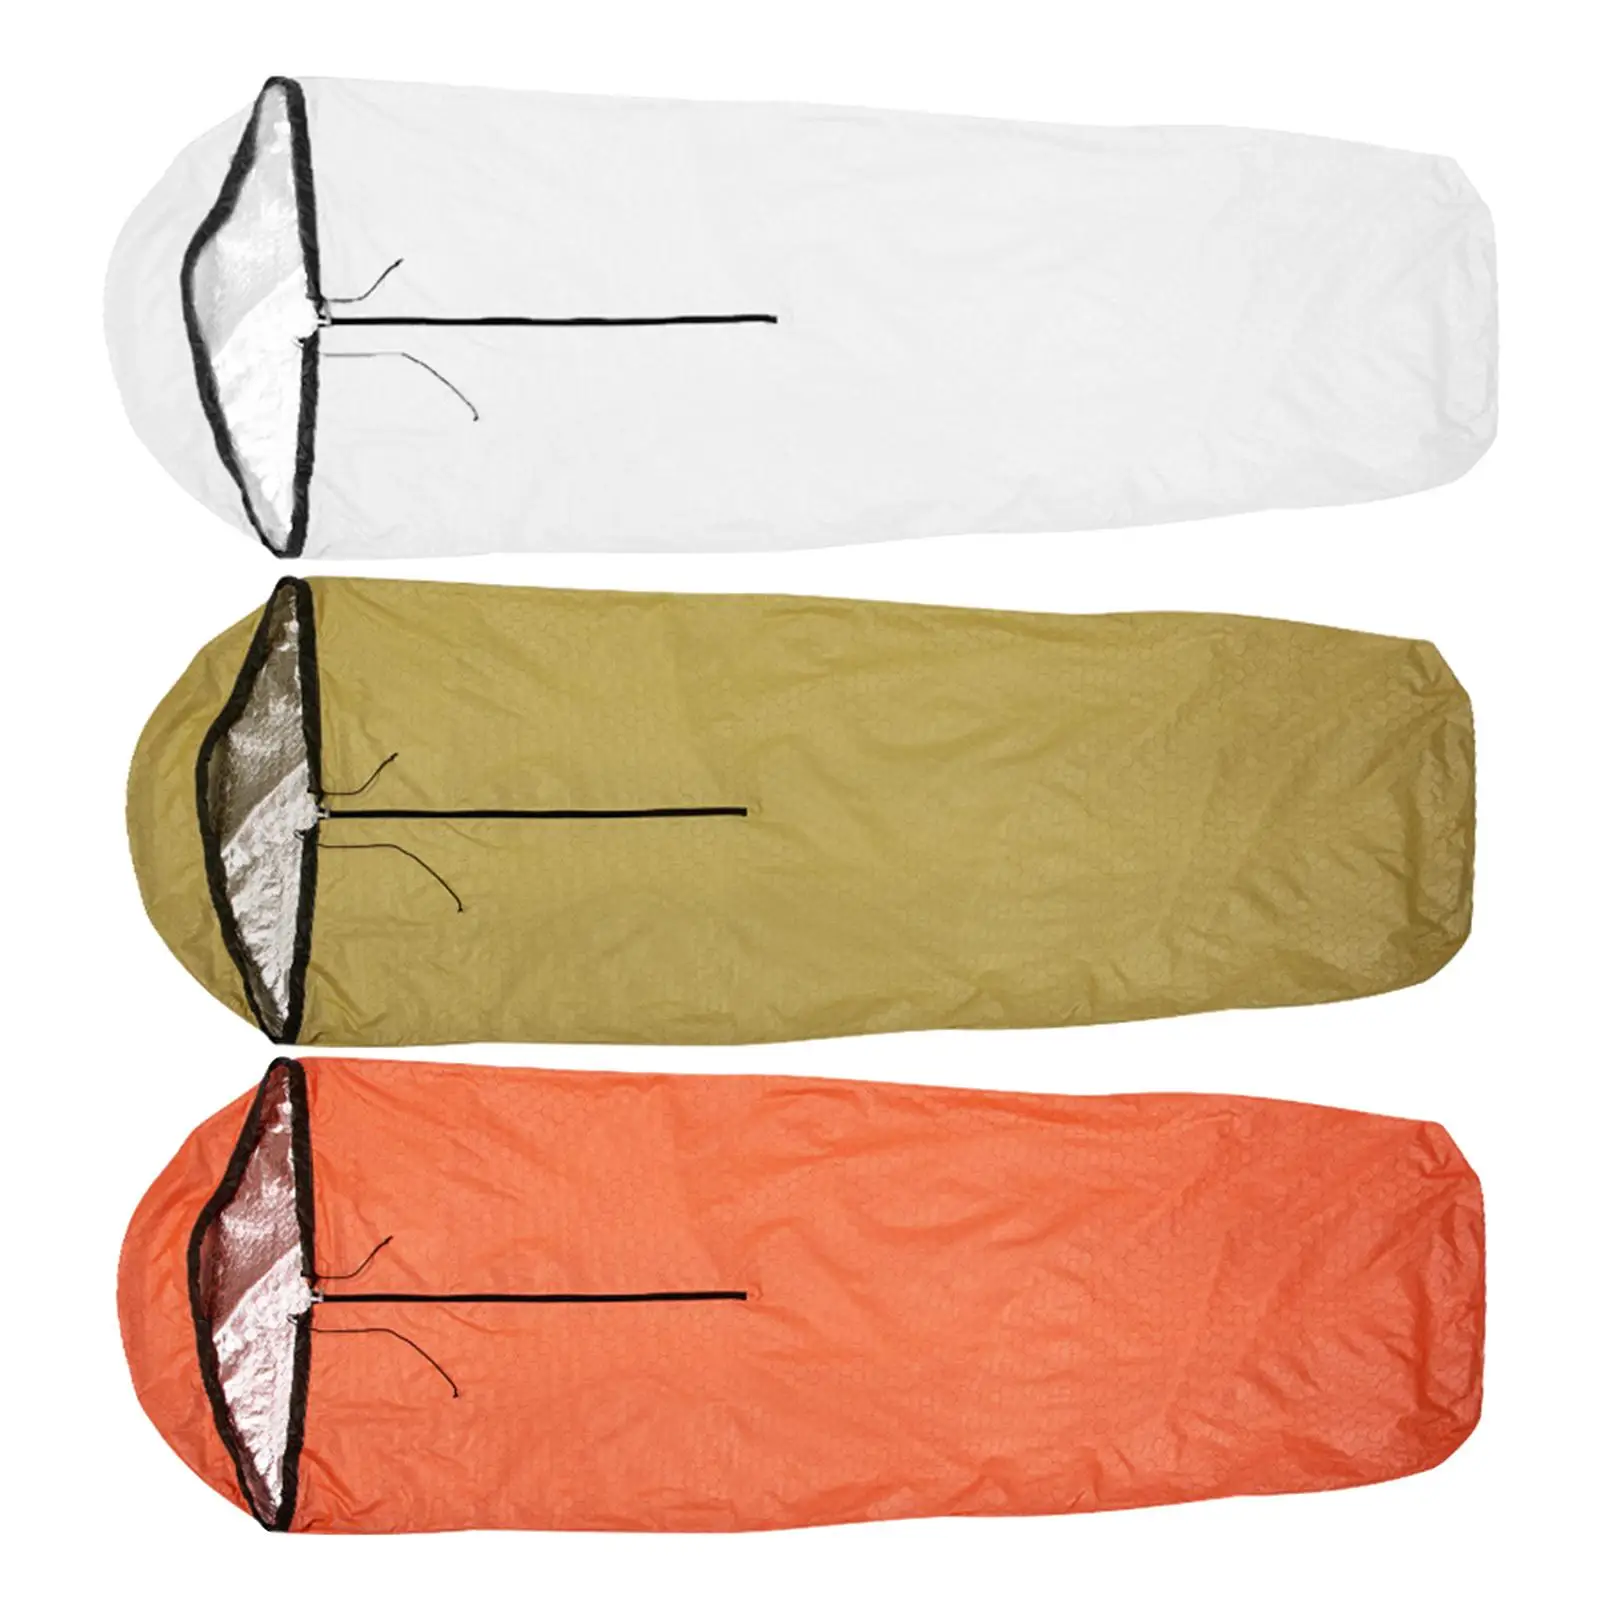 Emergency Sleeping Bag Reusable Multi Purpose for Outdoor Survival Adults